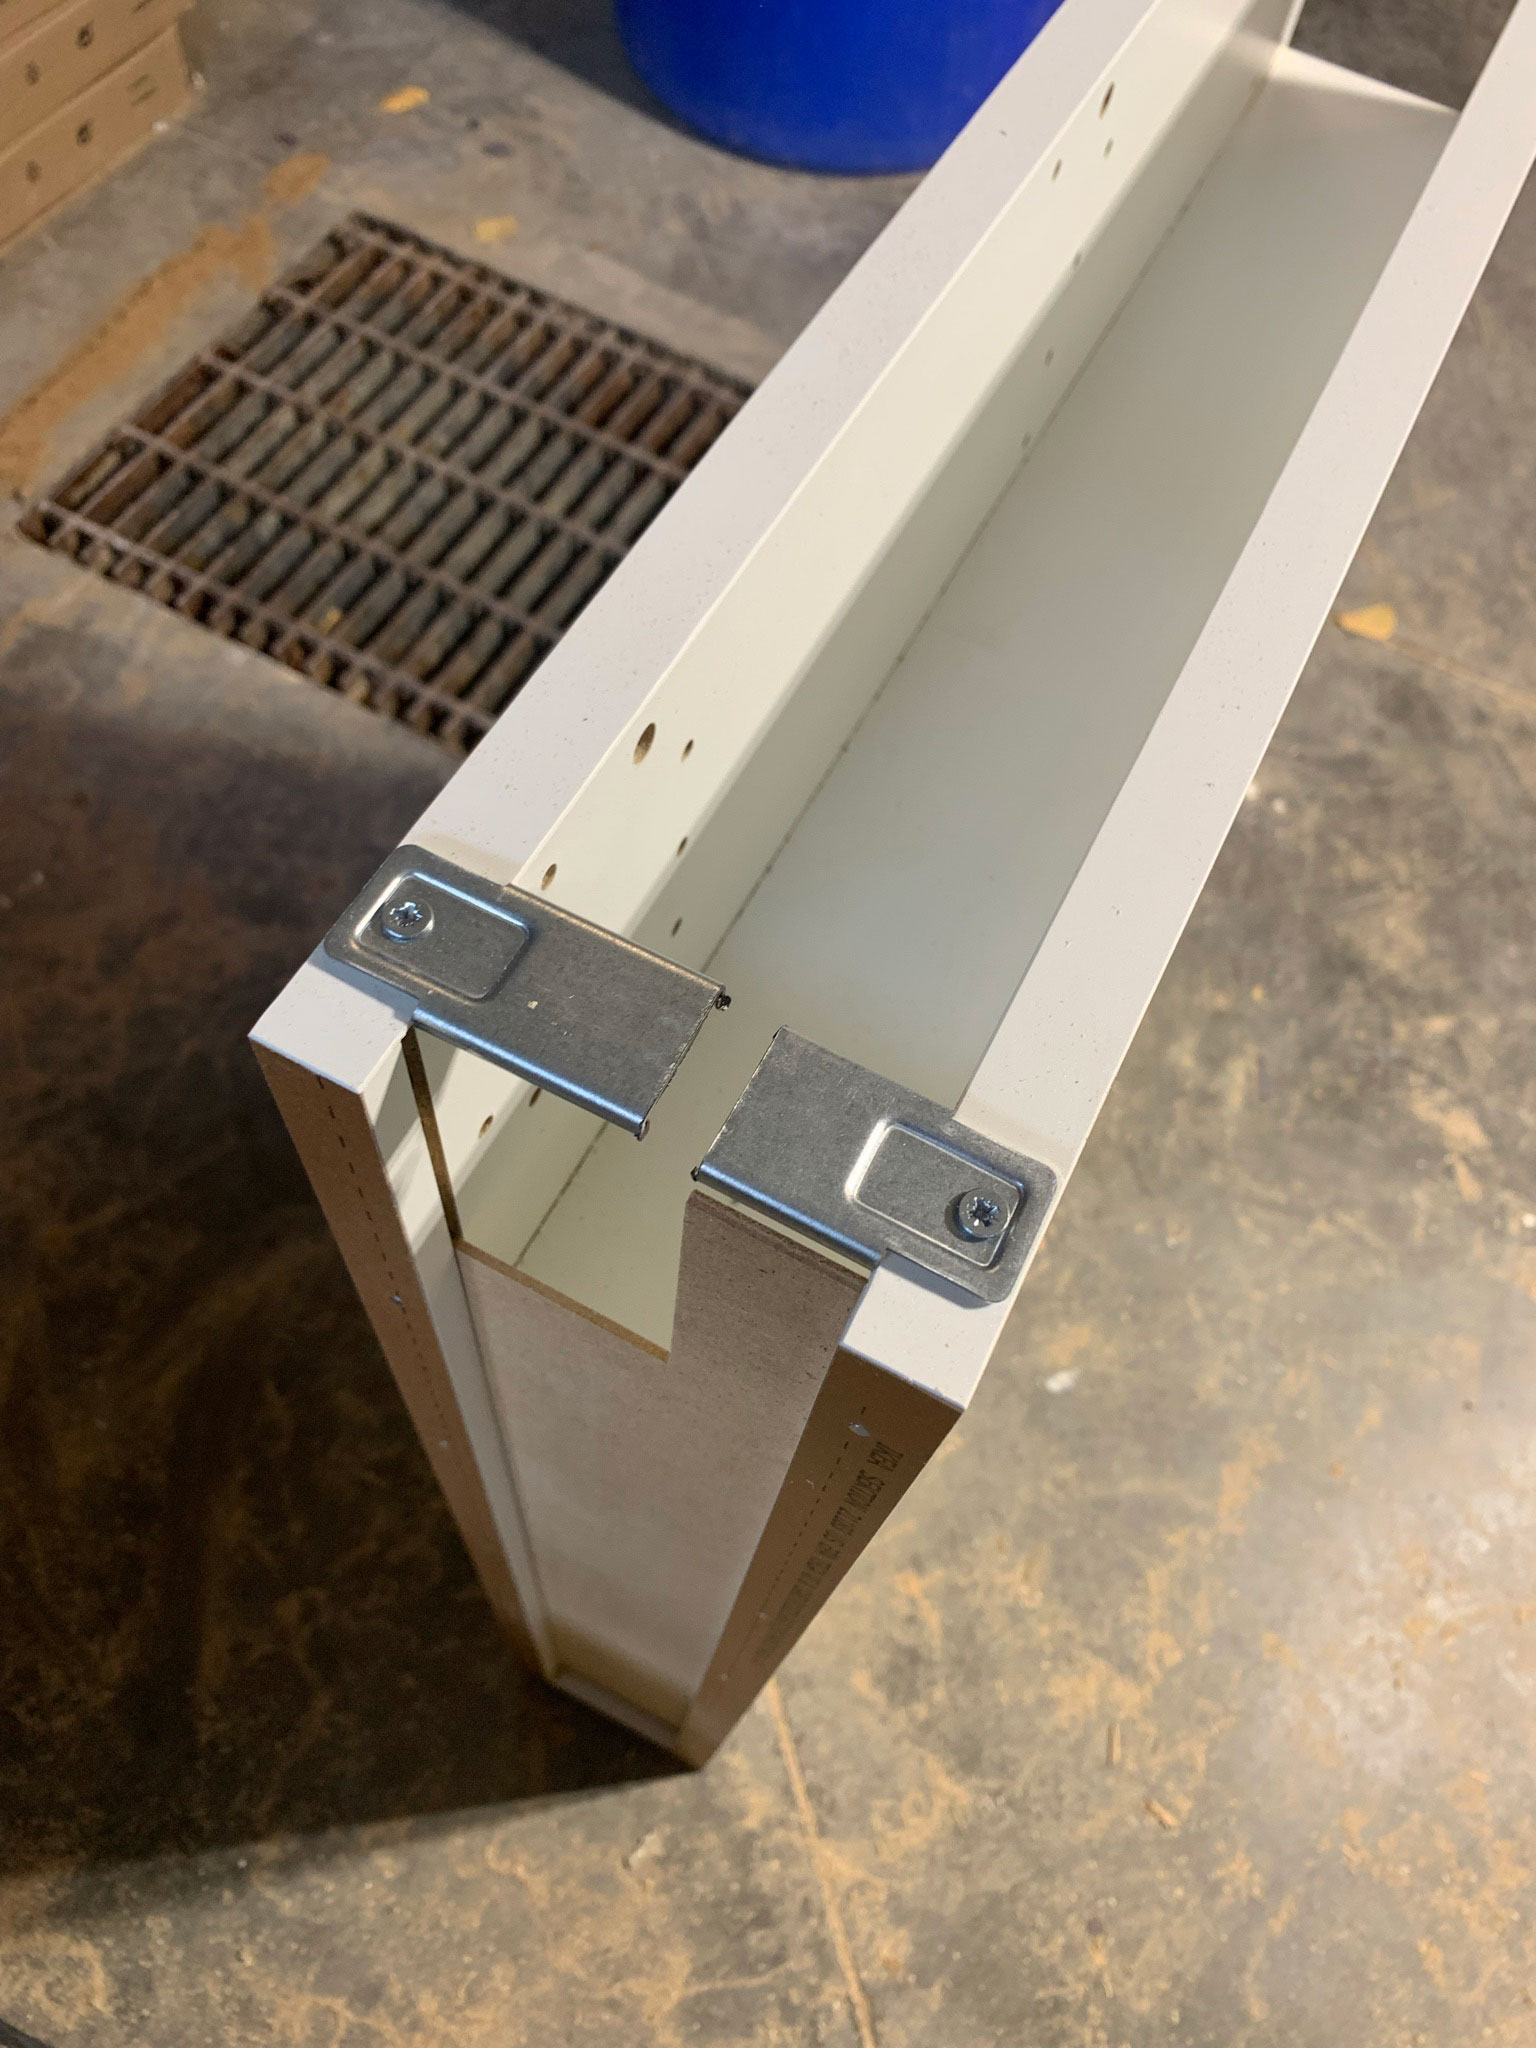 top of cabinet showing a metal brace which has been cut